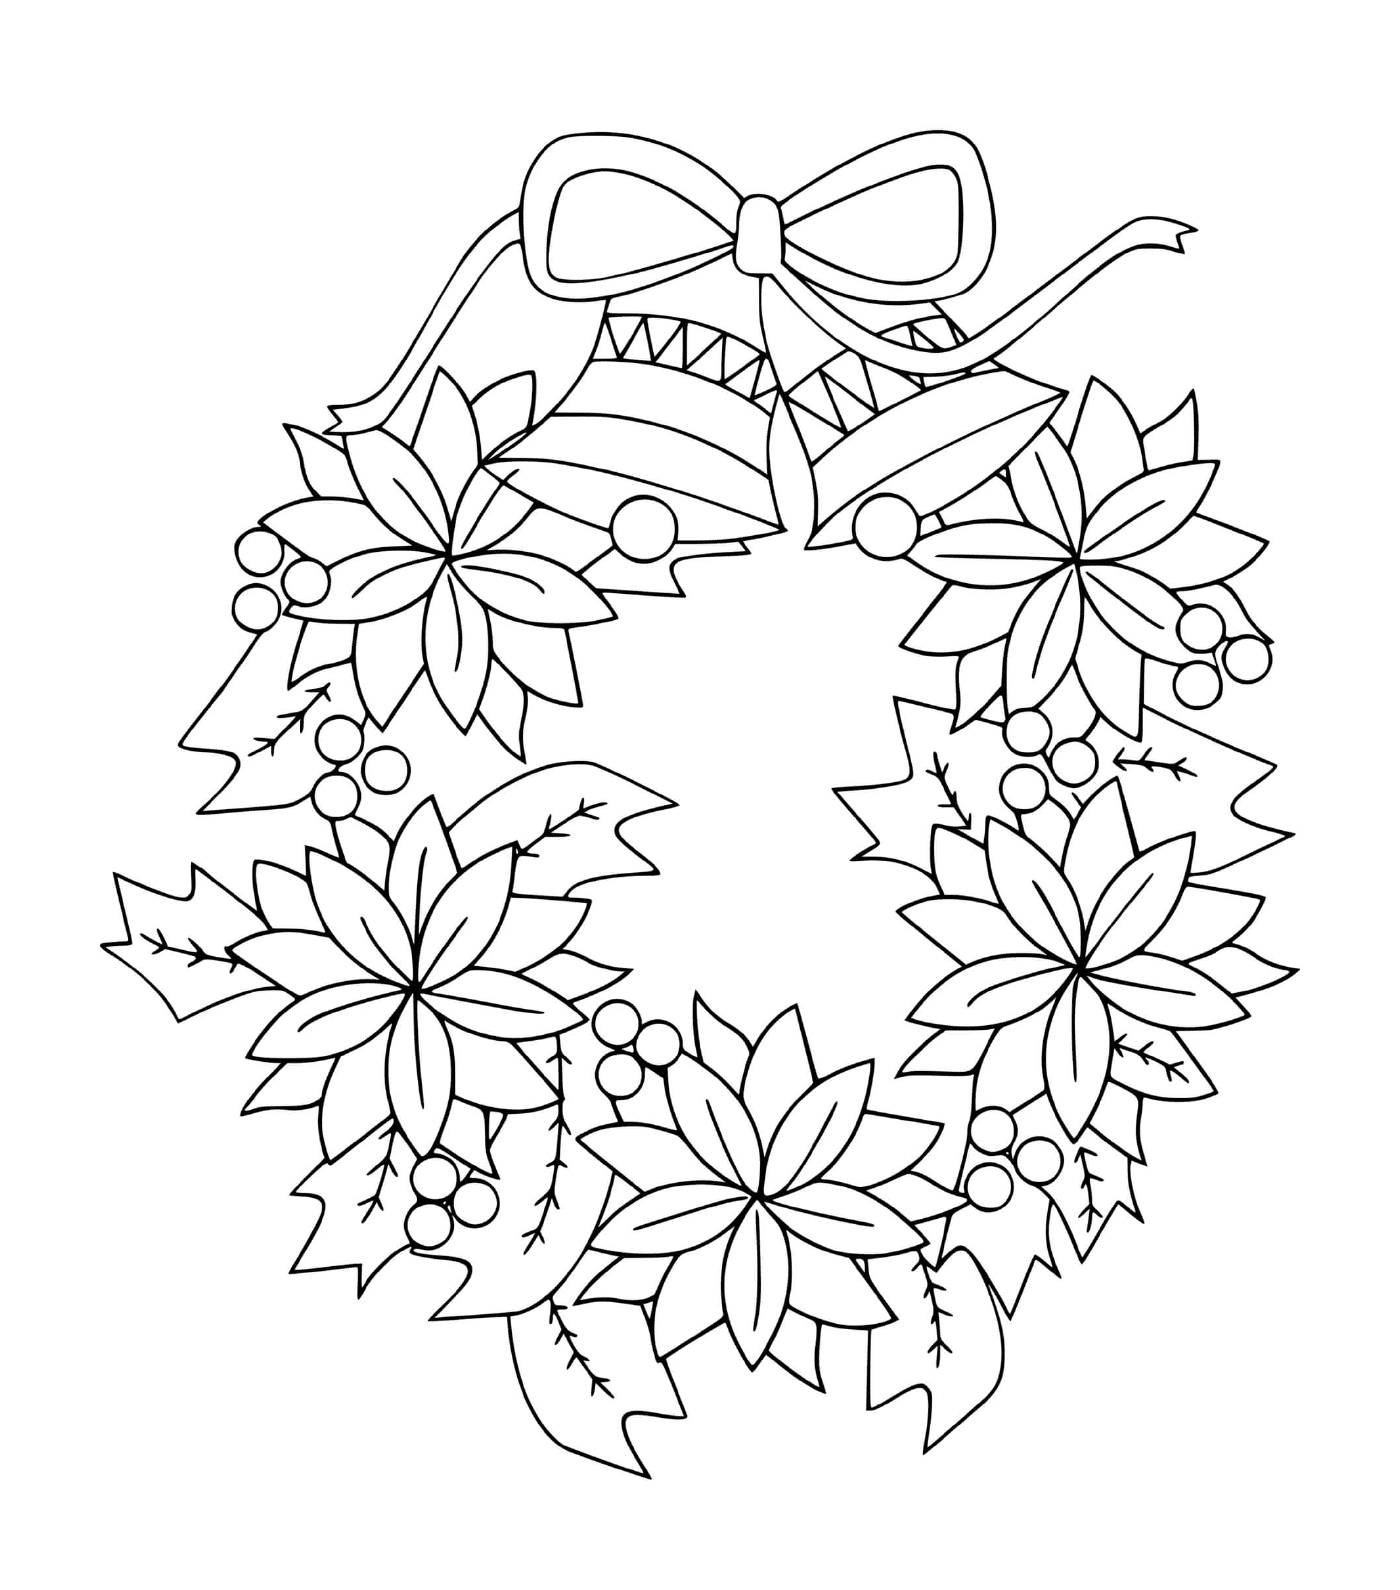  A Christmas crown with flowers and bells 